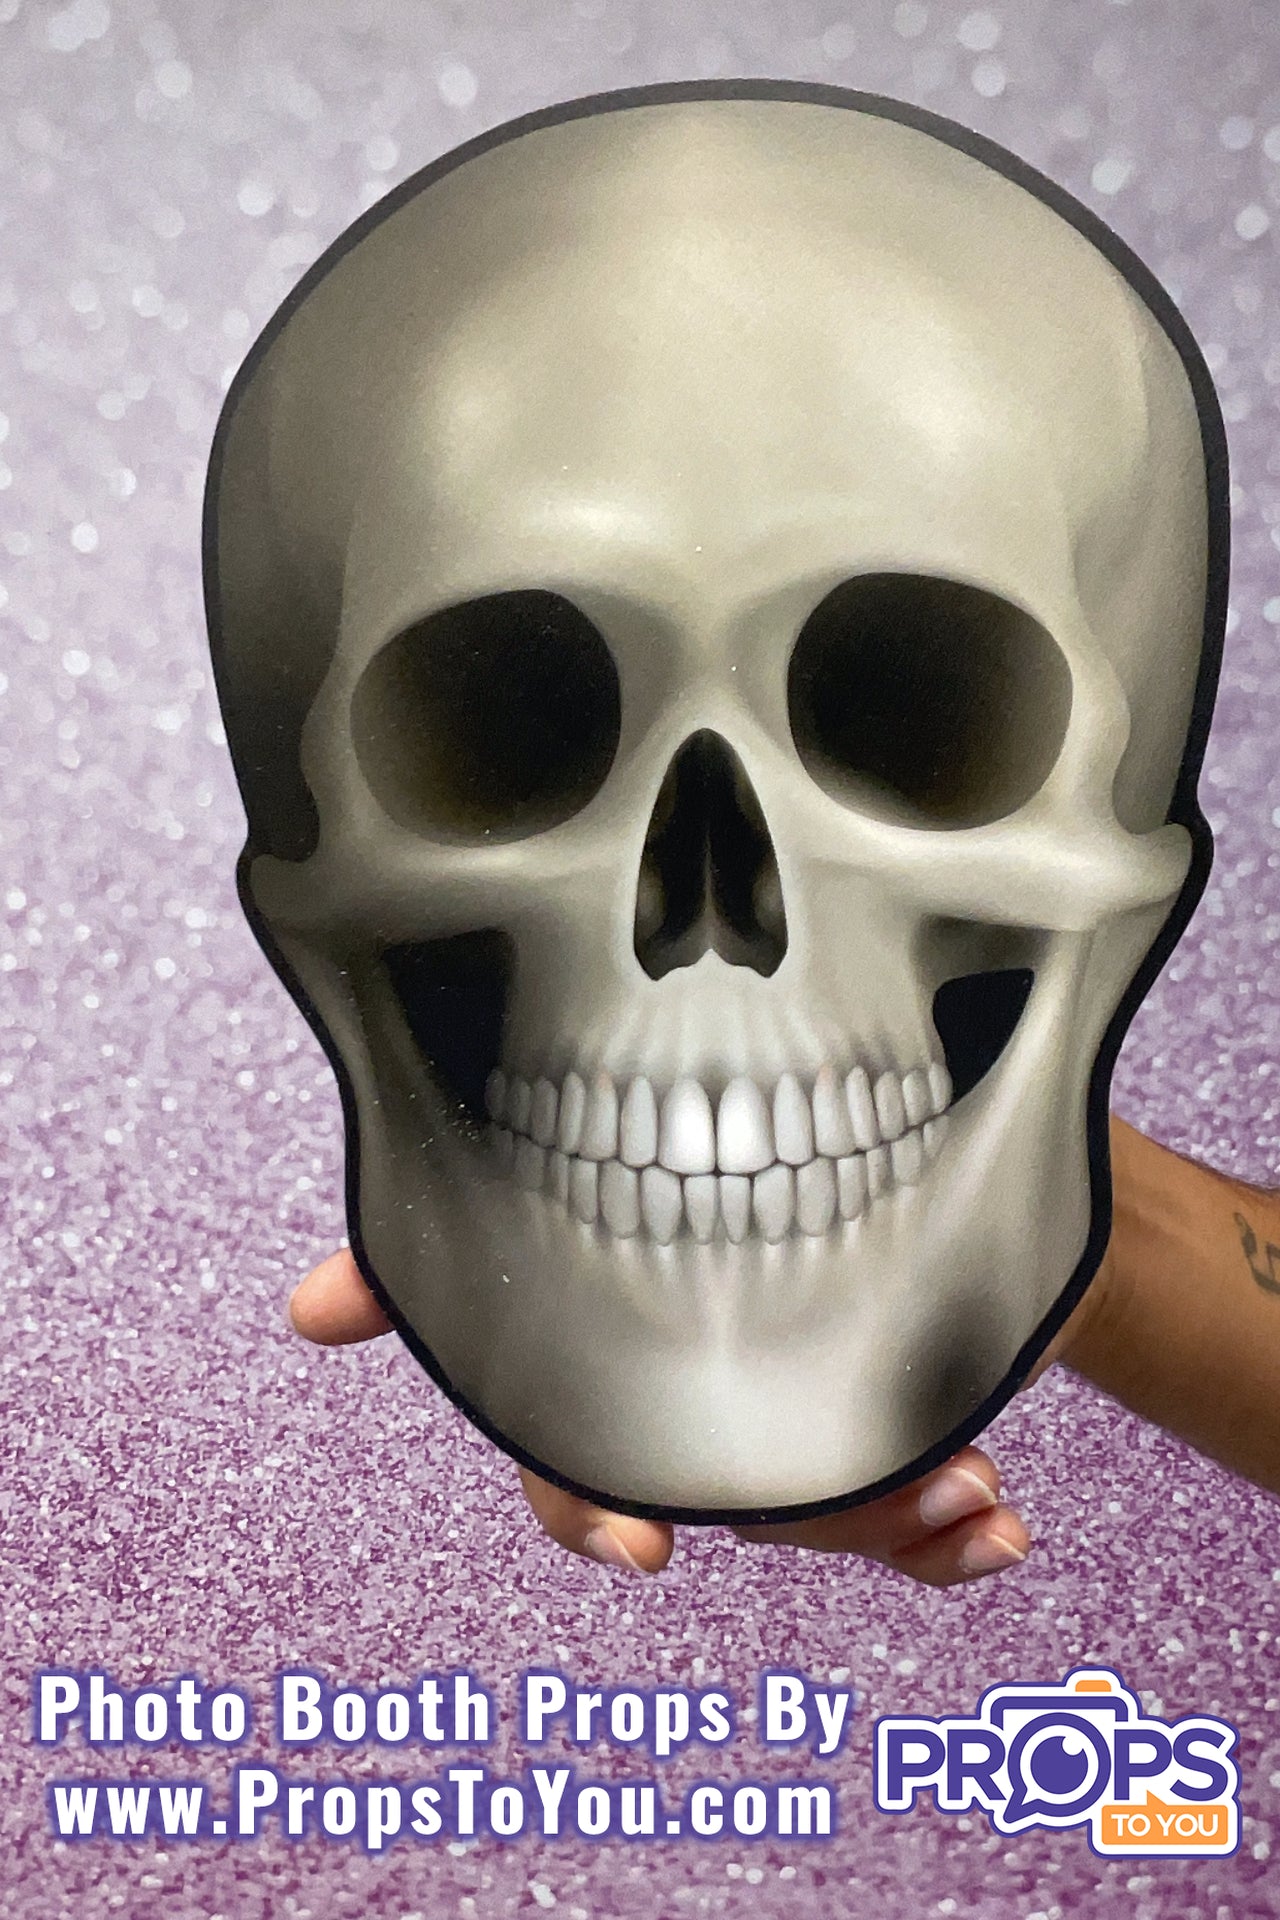 BUNDLE: Halloween 2 - 5 Double-Sided Photo Booth Props